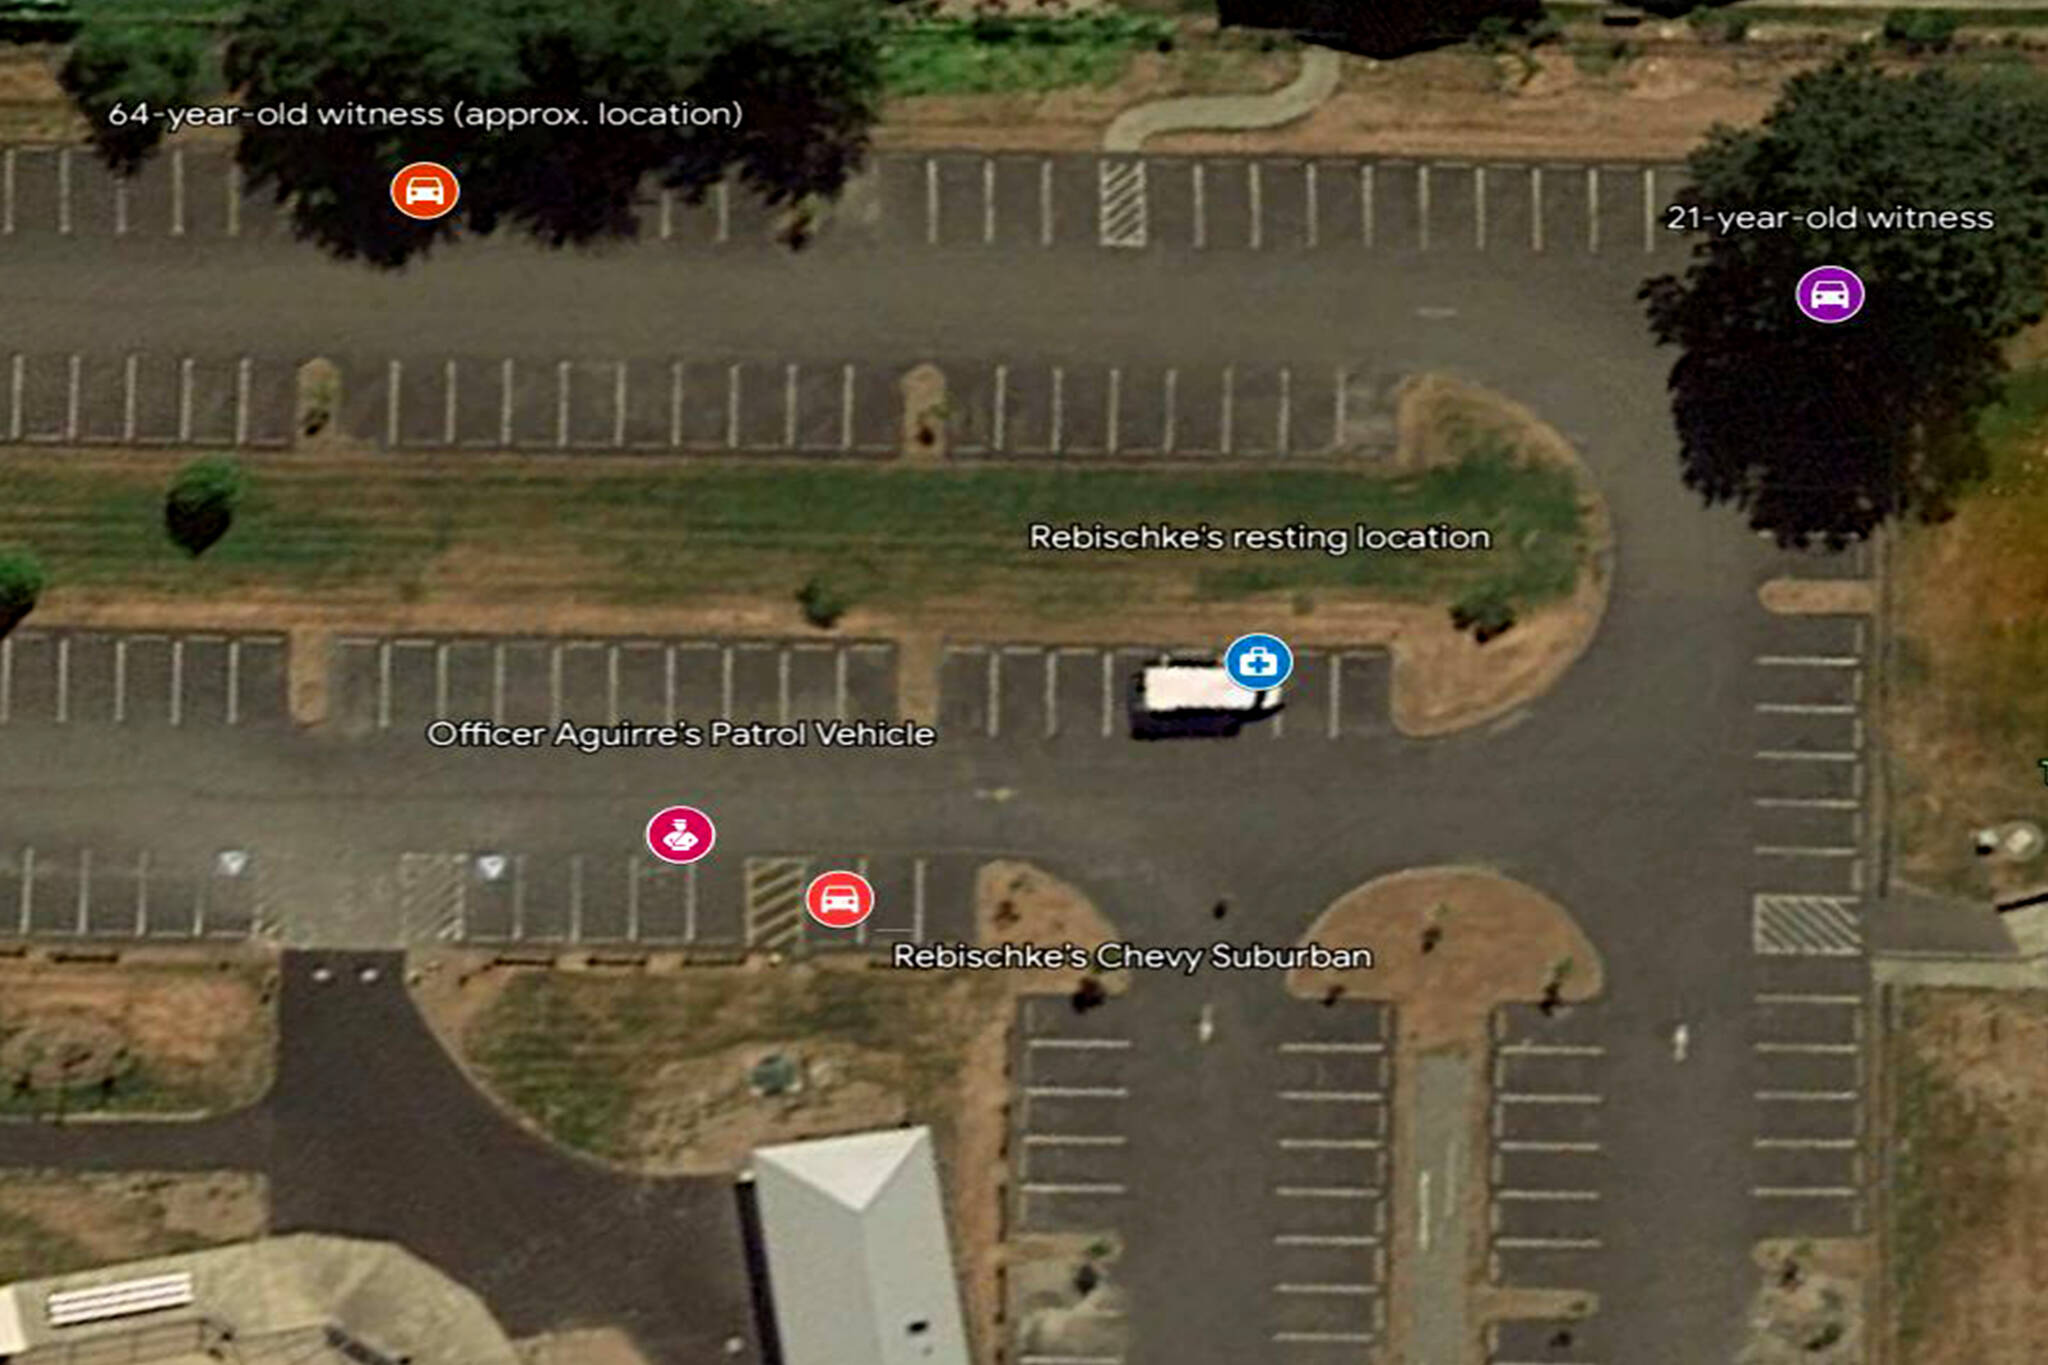 An aerial view of the Torguson Park parking lot showing where witnesses were located during the shooting.